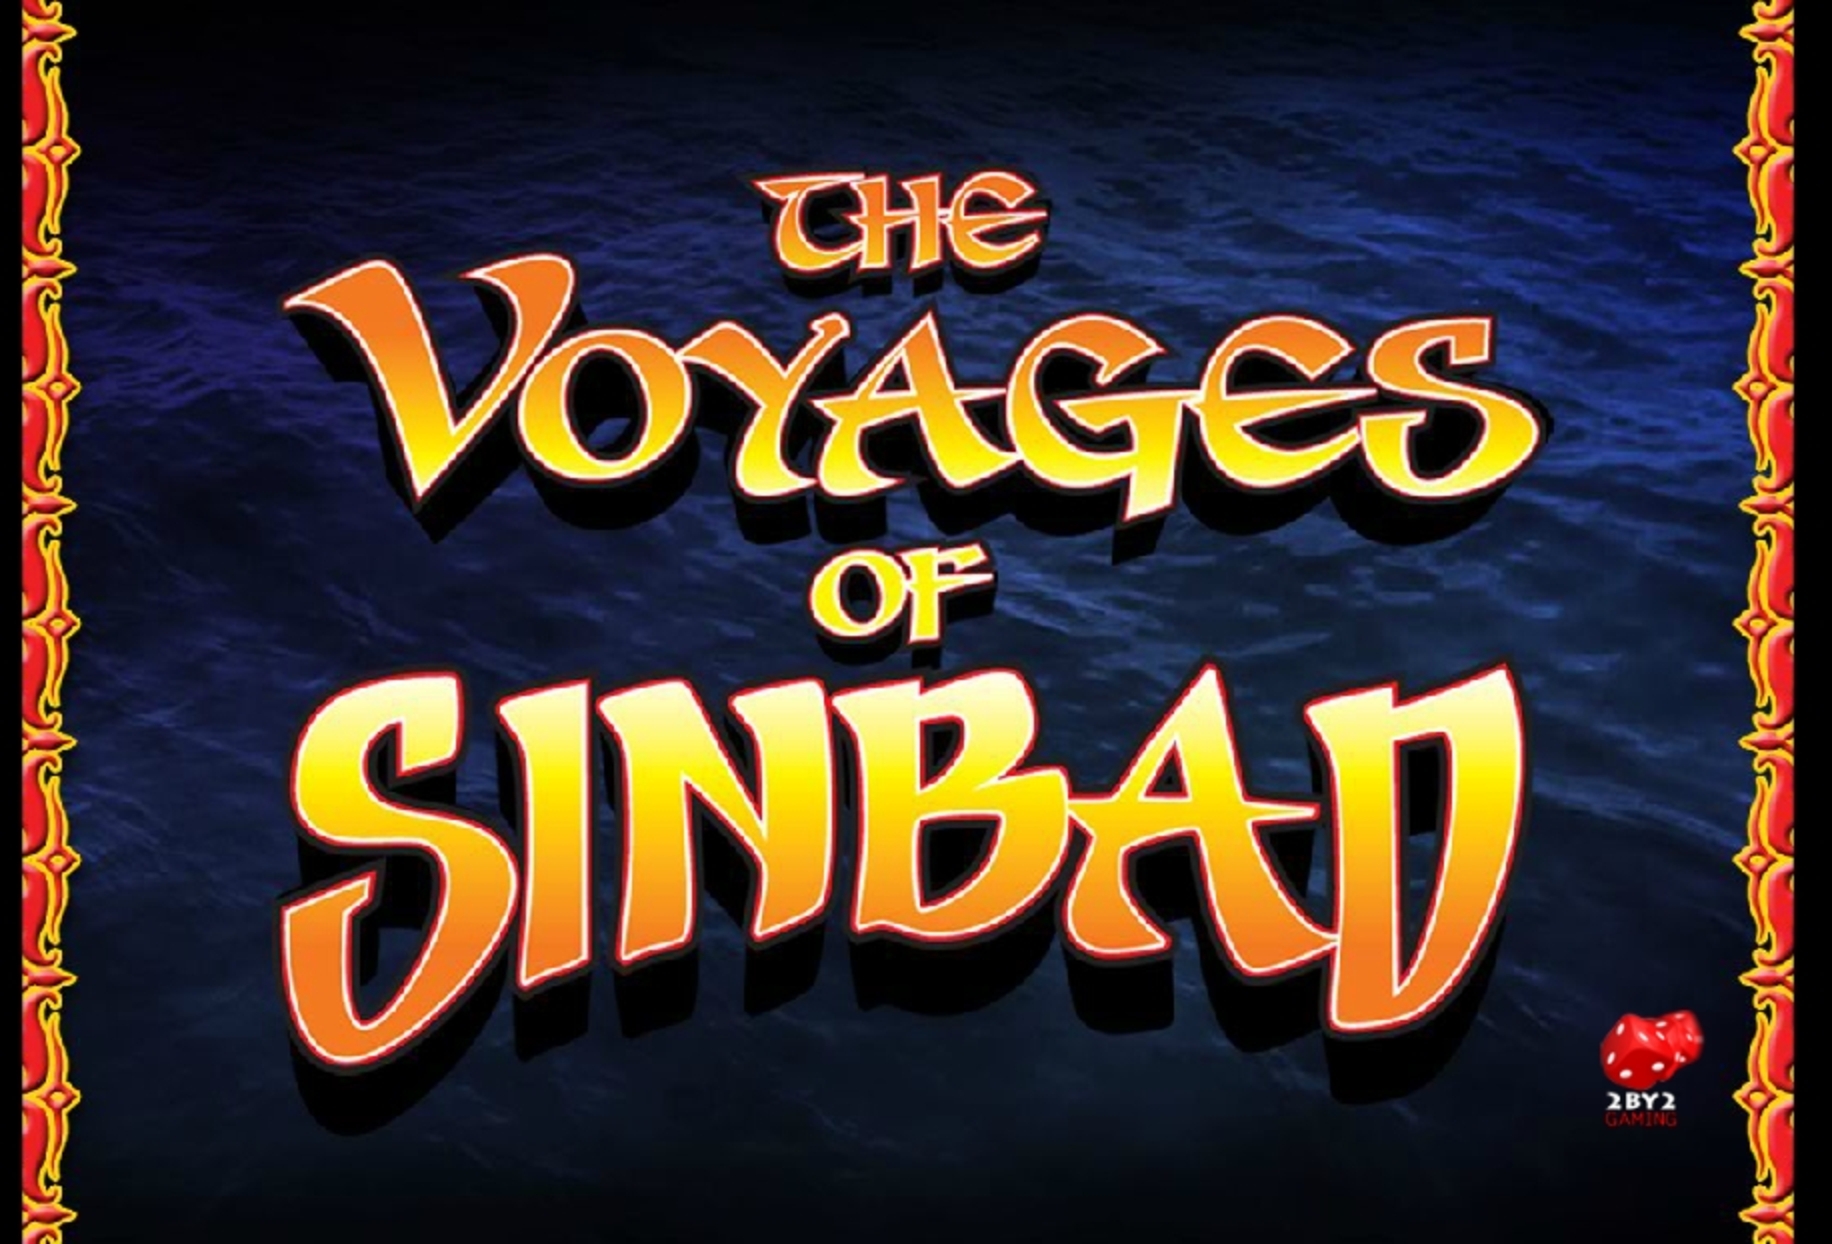 Play The voyages of Sinbad Free Casino Slot Game by 2 By 2 Gaming